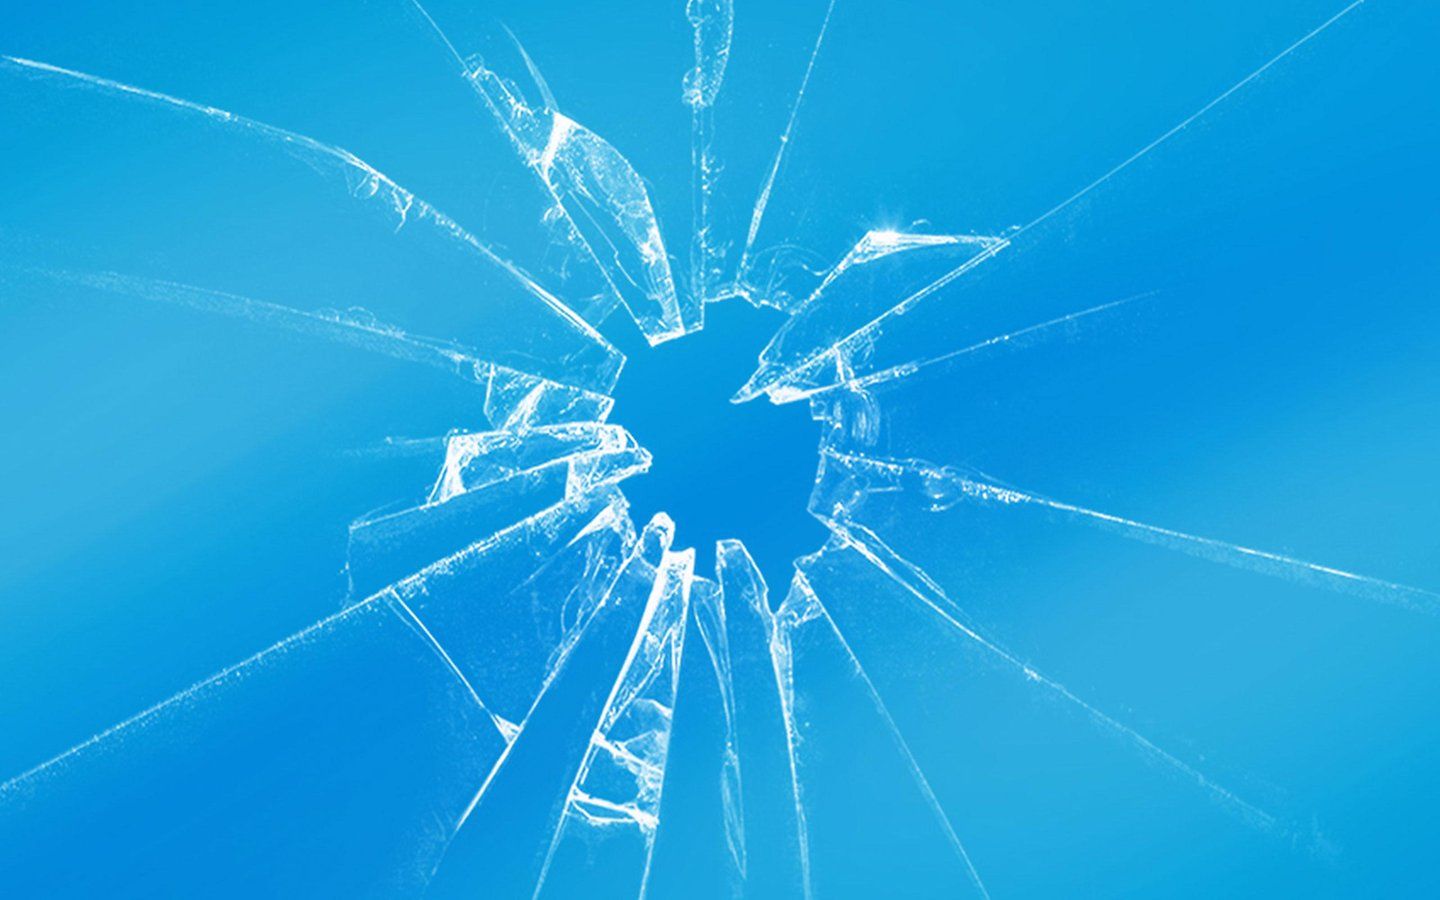 hd wallpapers apk cracked